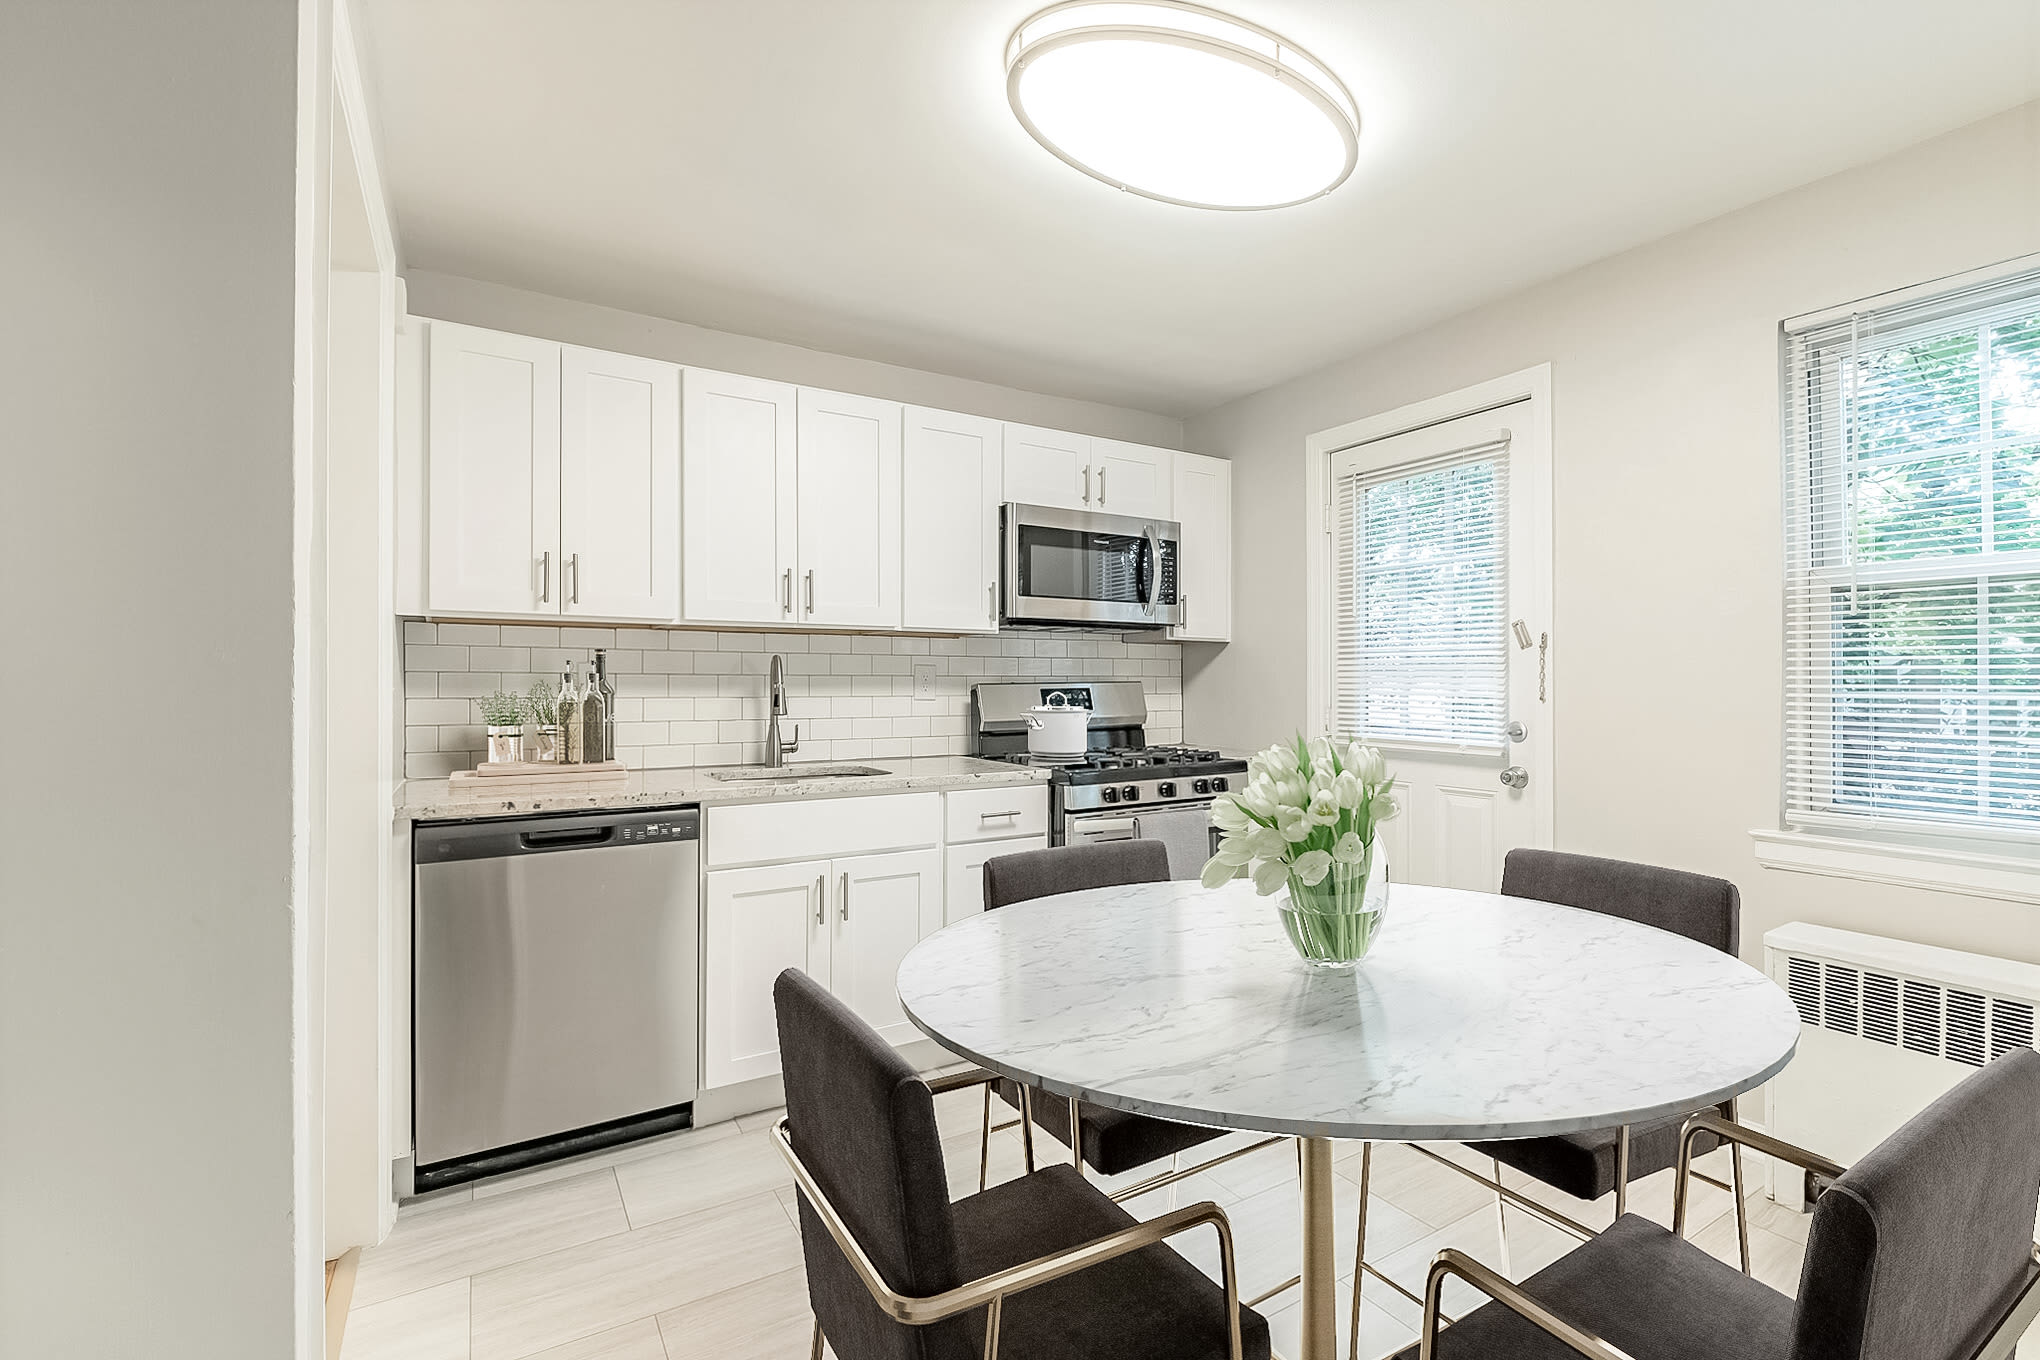 Updated kitchen appliances at Eagle Rock Apartments at Maplewood in Maplewood, New Jersey